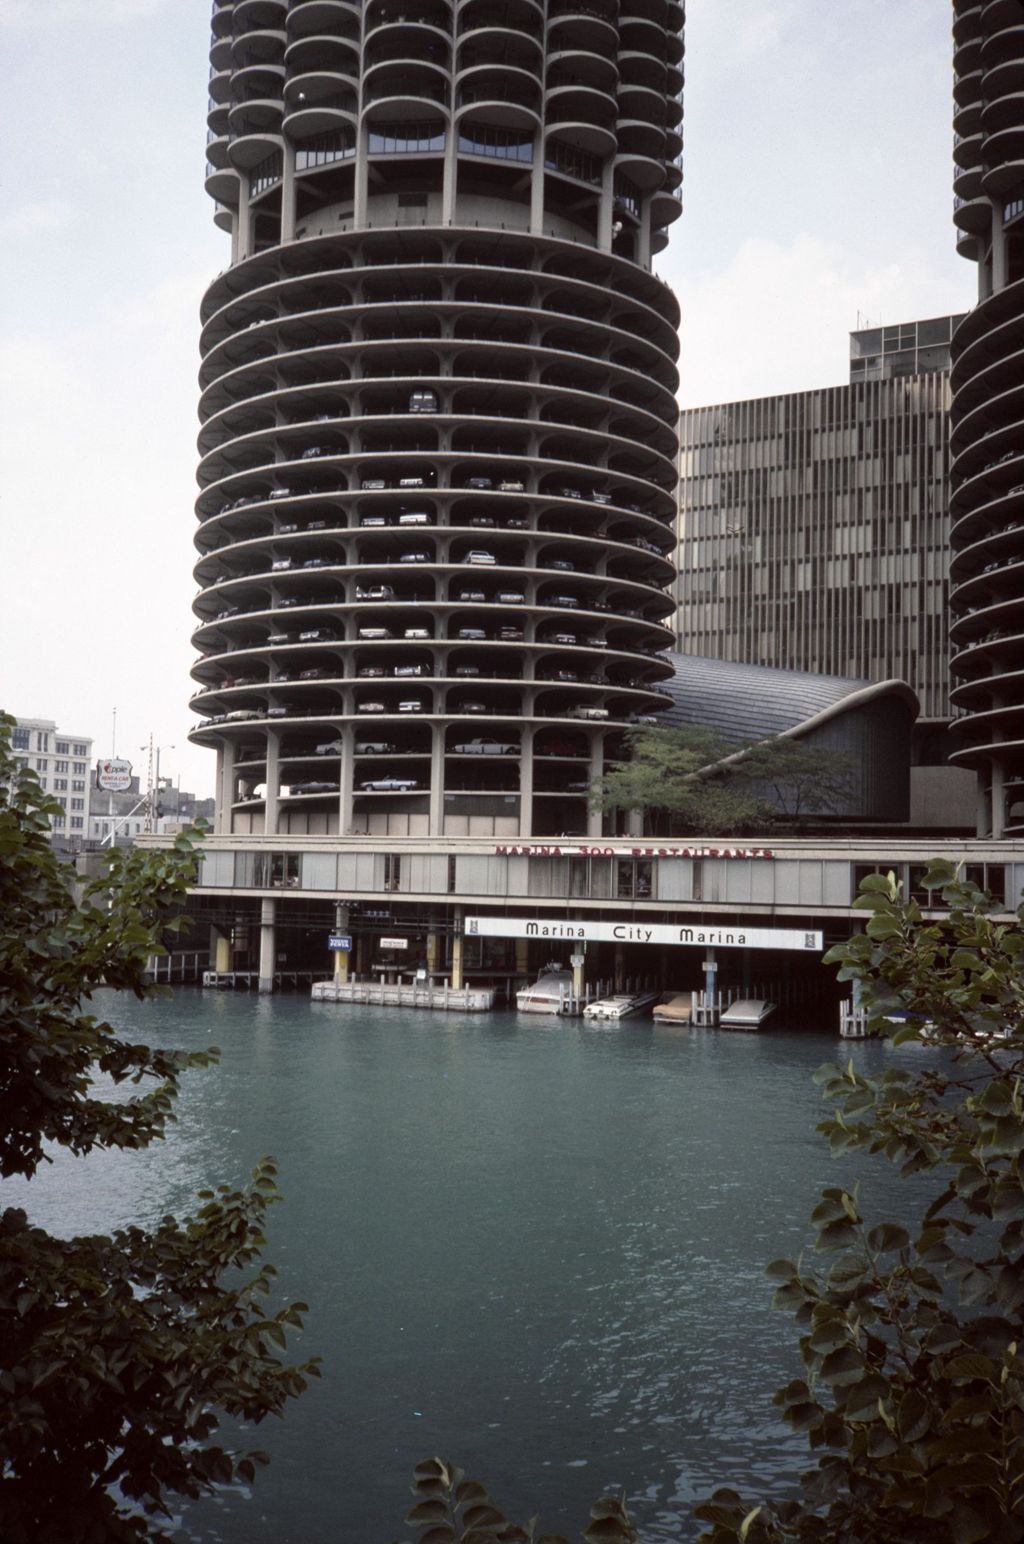 Miniature of Marina City from the Chicago River